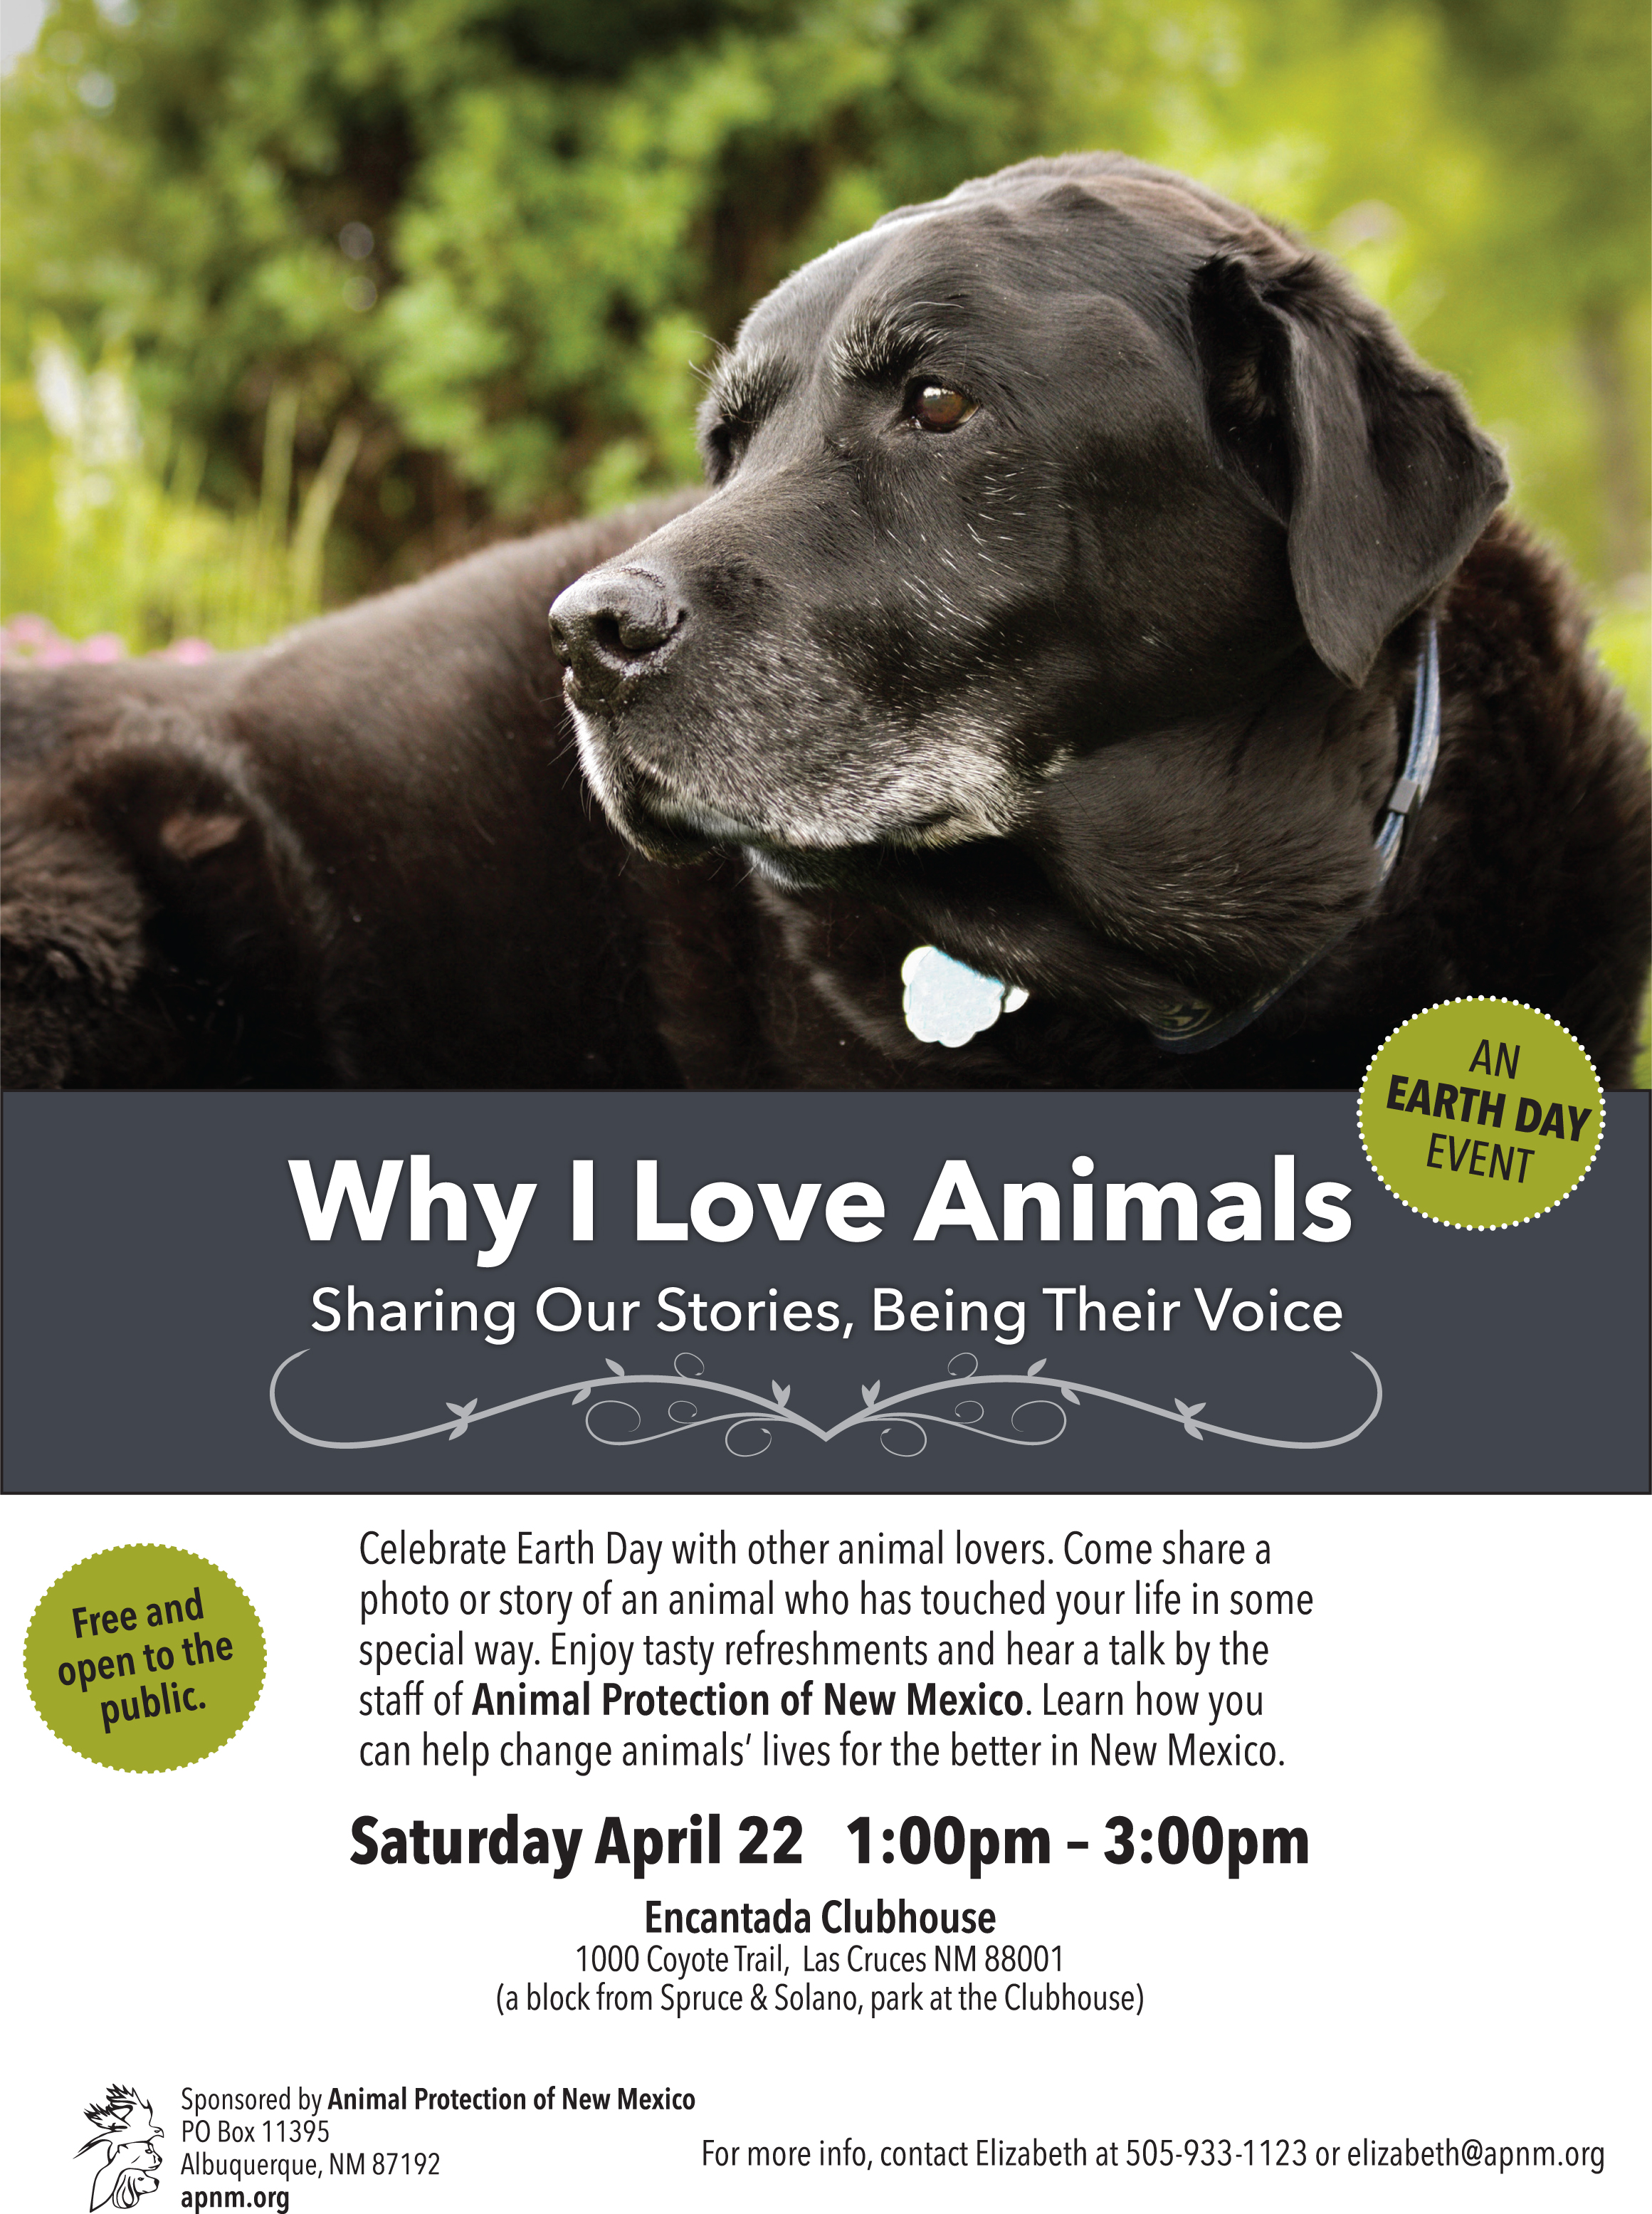 Why I Love Animals: Sharing Our Stories, Being Their Voice